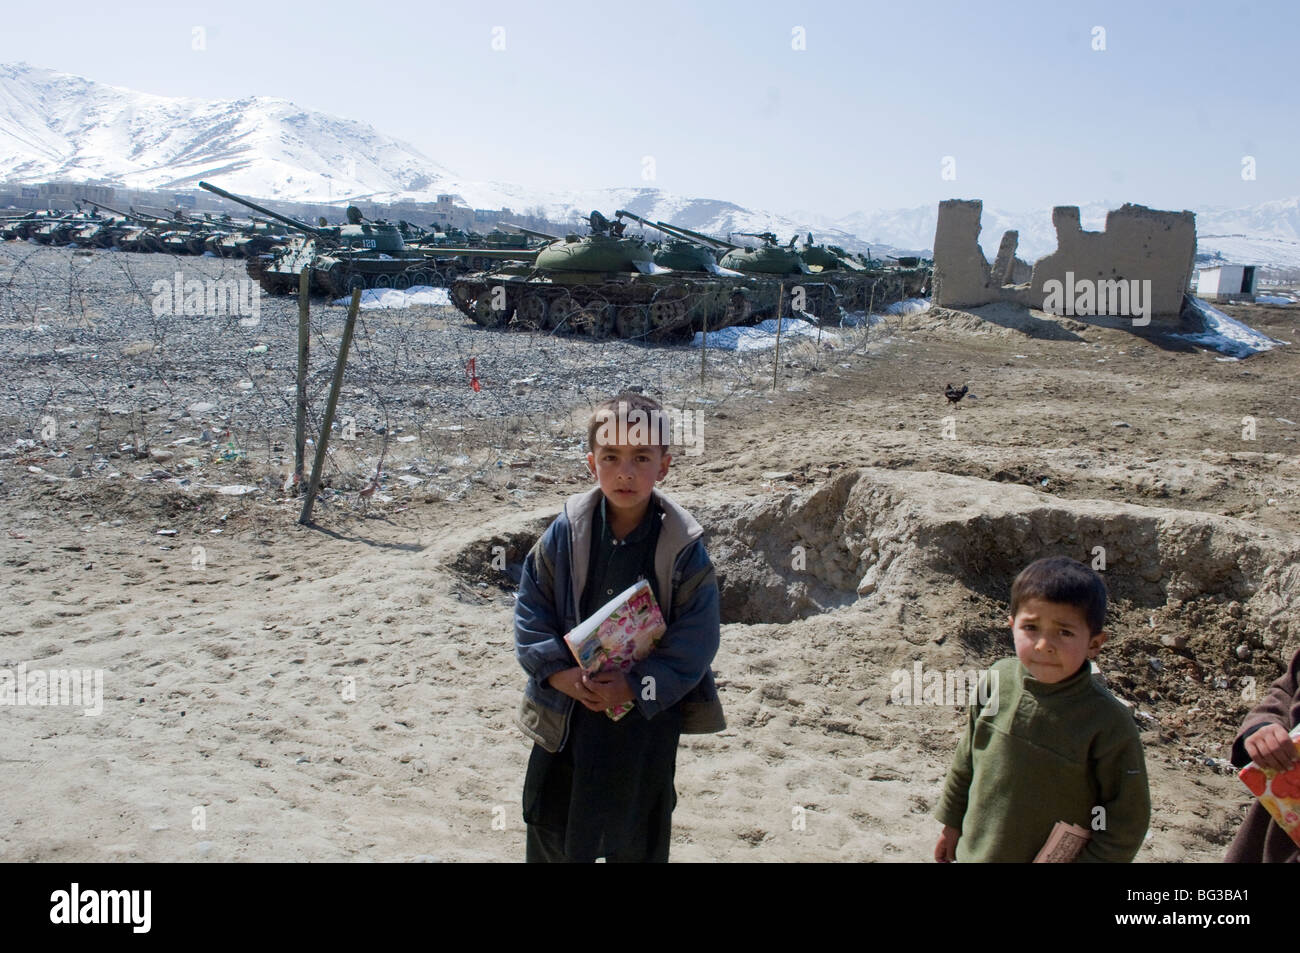 Afghan boys near old Russian T72 tanks in Kabul city, Afghanistan. Stock Photo